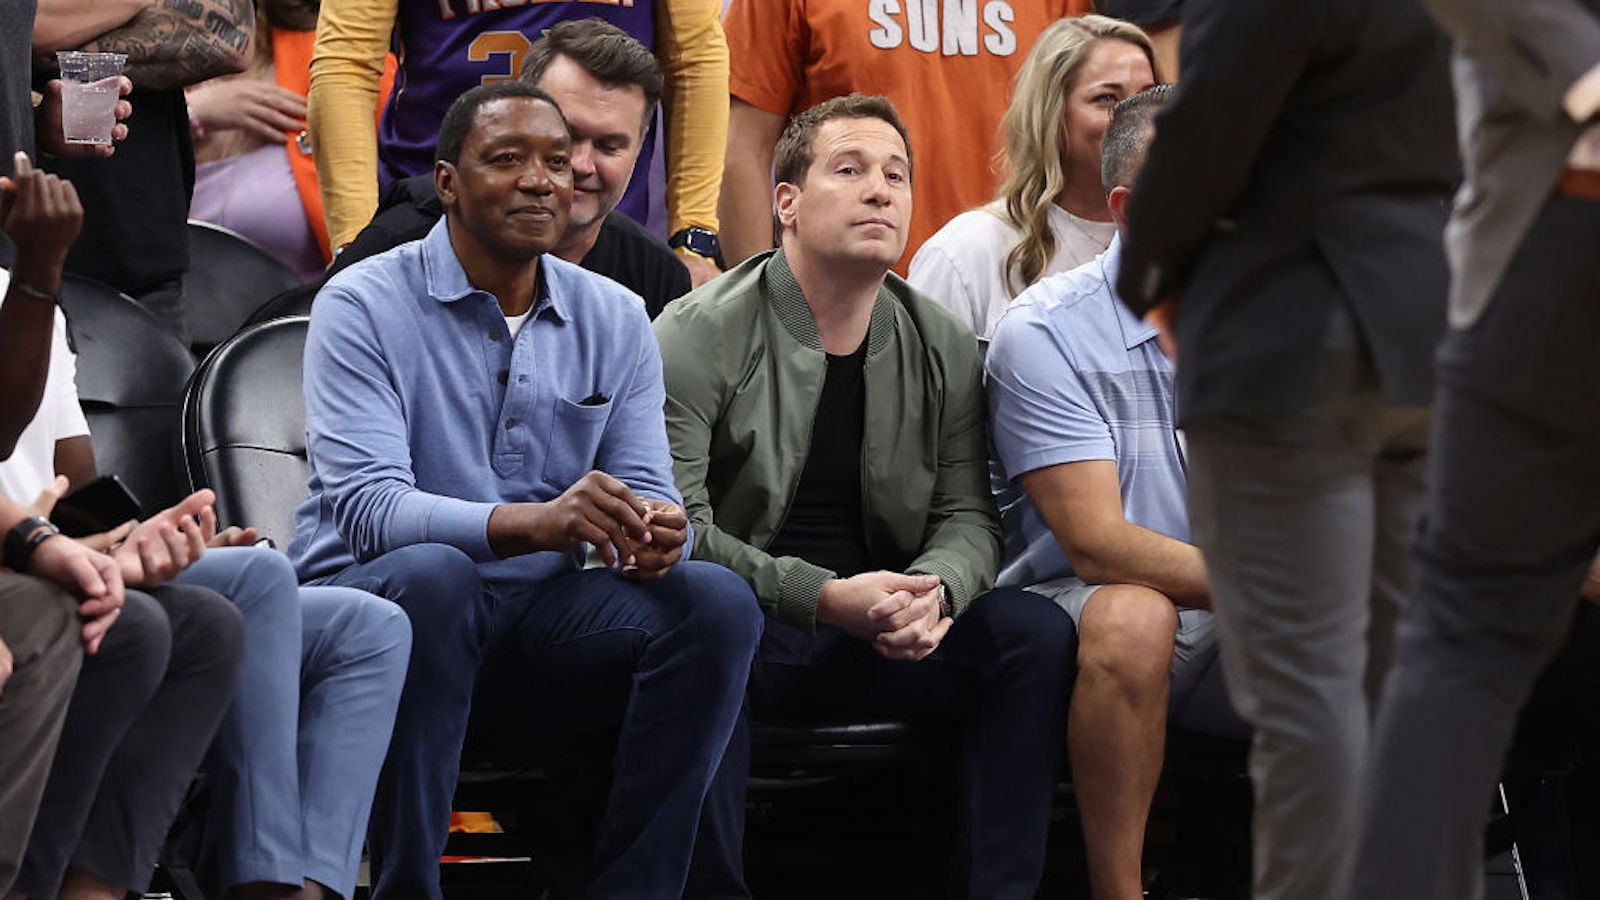 PHOENIX, ARIZONA - MAY 07: Former NBA athlete Isiah Thomas and Phoenix Suns owner Mat Ishbia attend Game Four of the NBA Western Conference Semifinals at Footprint Center on May 07, 2023 in Phoenix, Arizona. The Suns defeated the Nuggets 129-124. NOTE TO USER: User expressly acknowledges and agrees that, by downloading and or using this photograph, User is consenting to the terms and conditions of the Getty Images License Agreement.